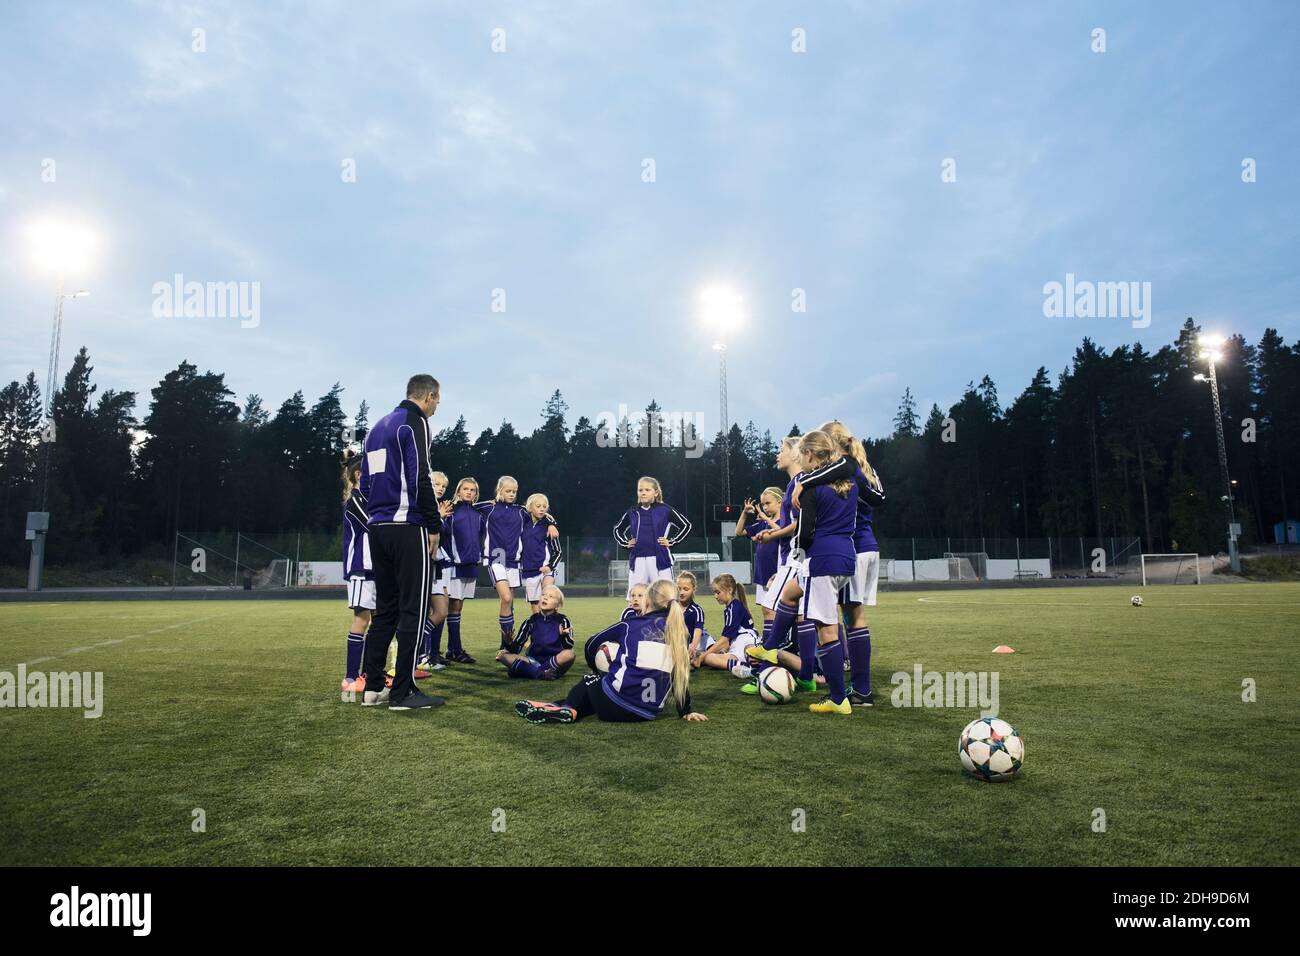 Coach standing by female soccer team on field against sky Stock Photo